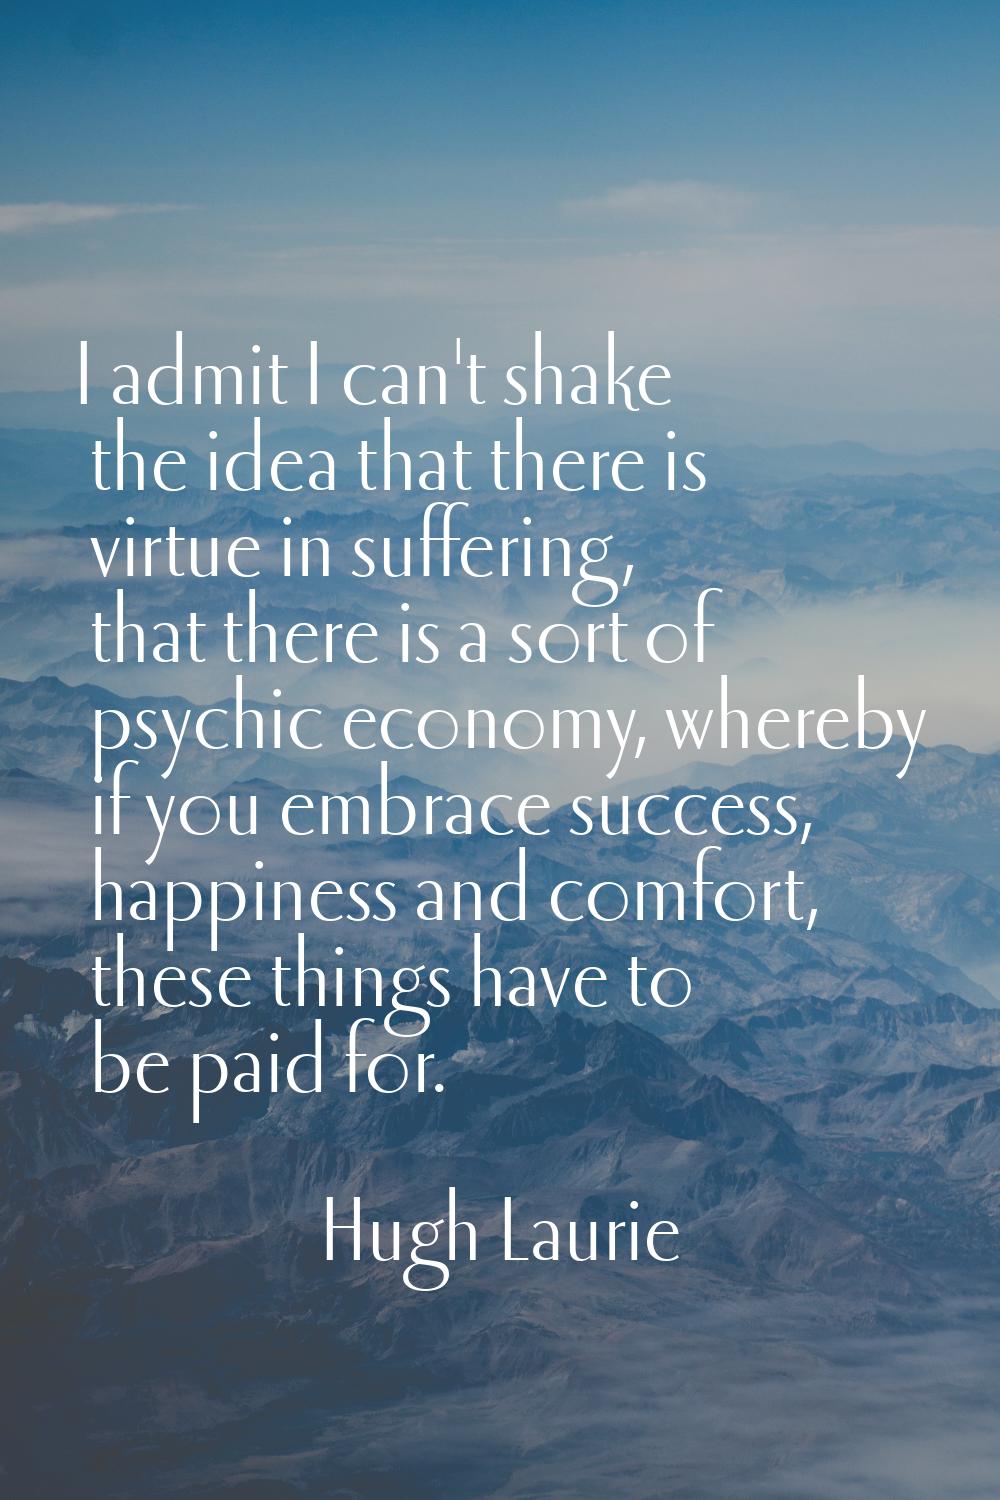 I admit I can't shake the idea that there is virtue in suffering, that there is a sort of psychic e